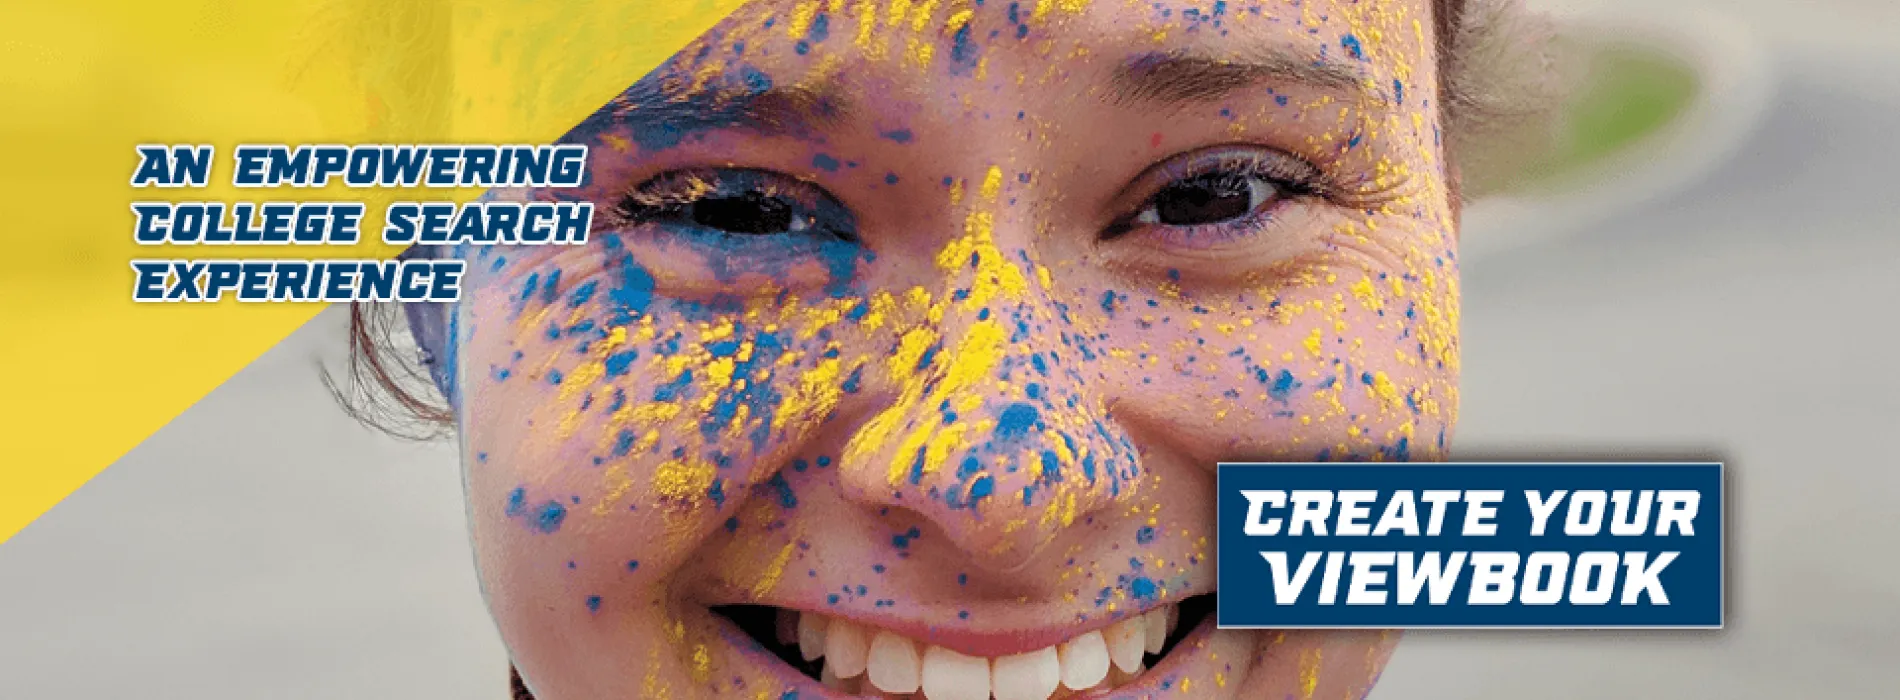 An empowering college search experience. Create your viewbook. Close up image of smiling student with blue and gold dust on face.